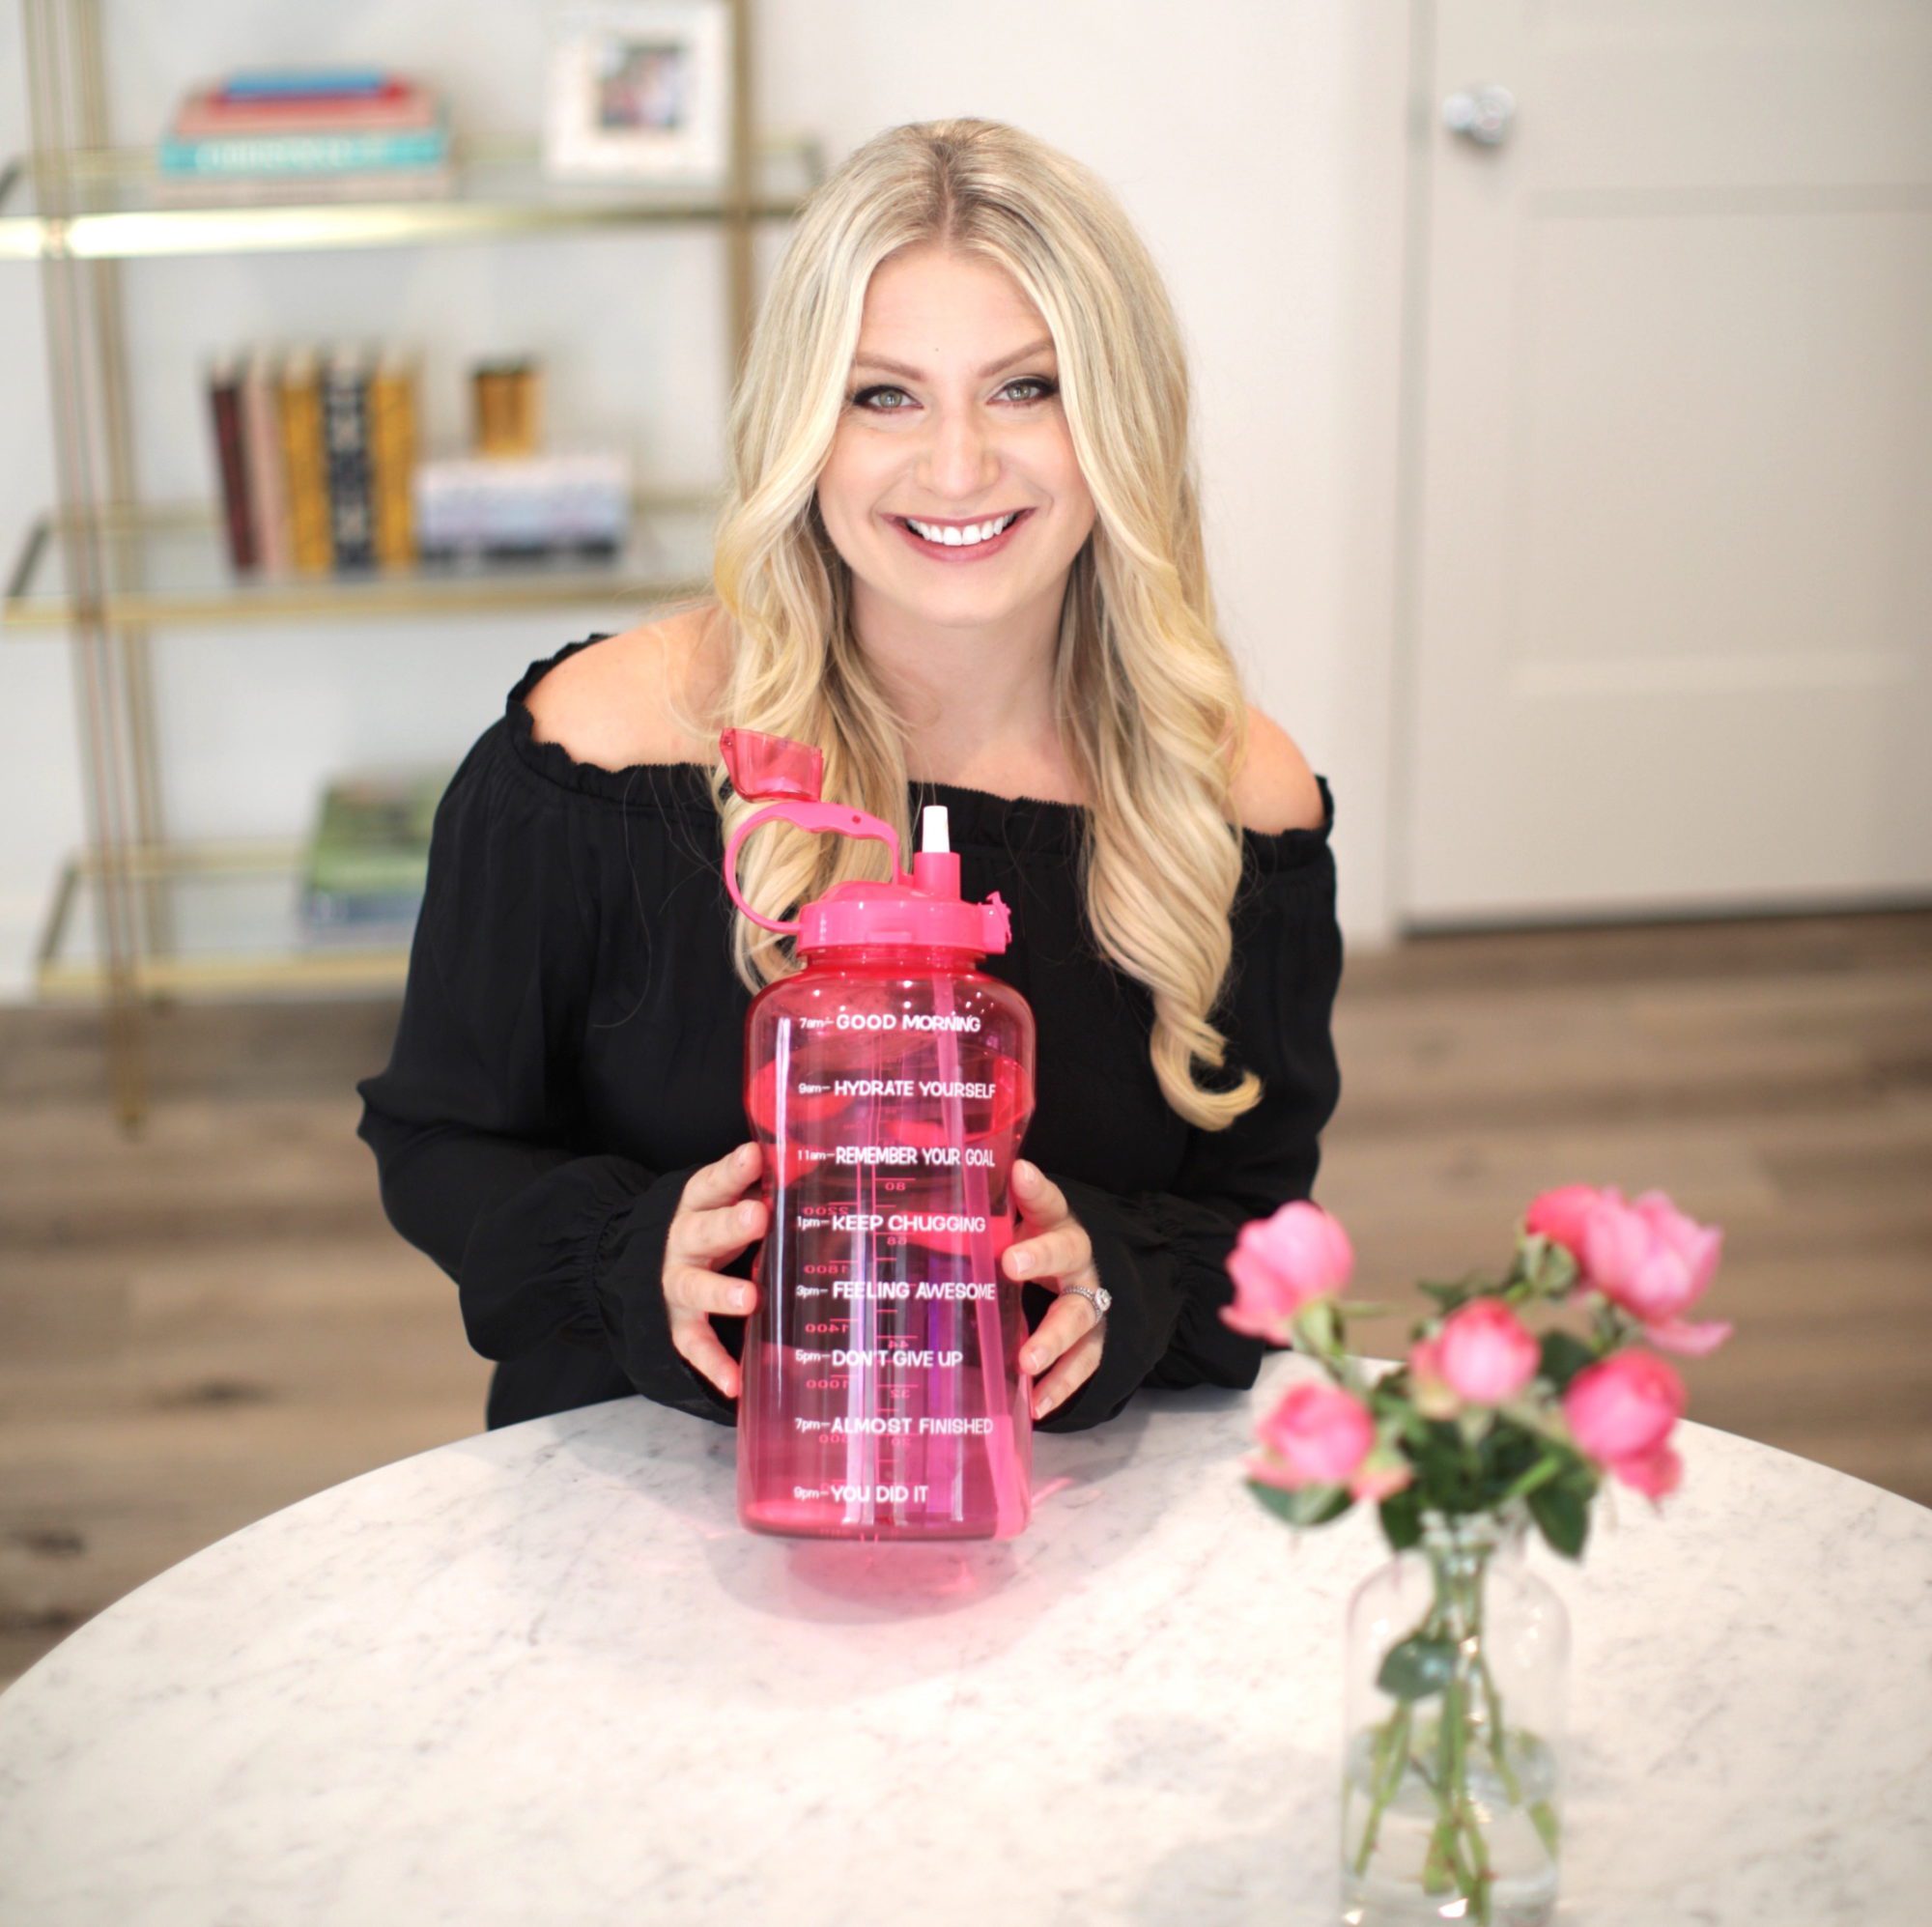 Emily Williams Holding Pink Waterbottle